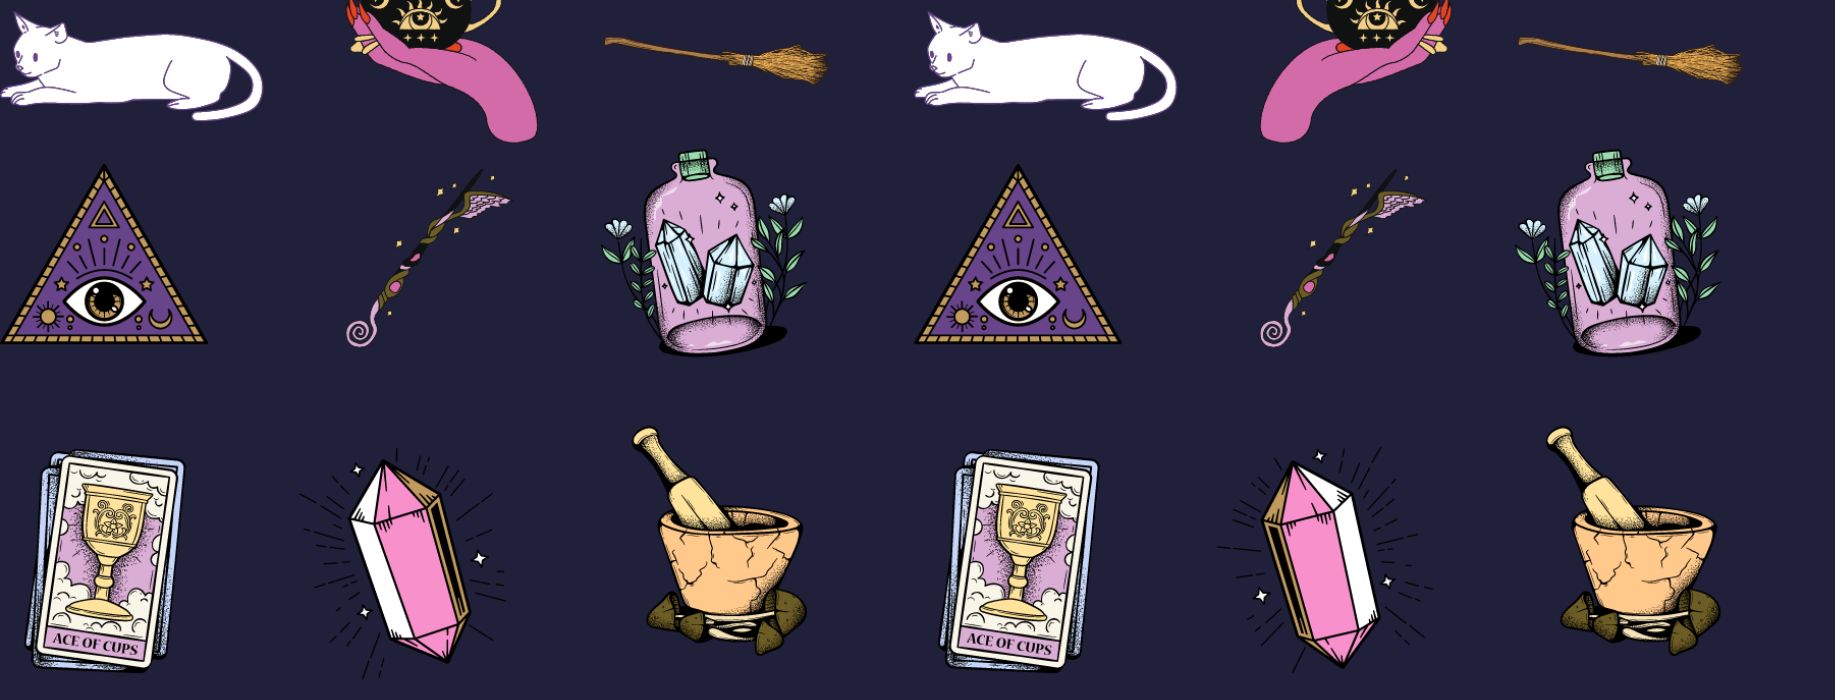 indigo background with small occult icons like cats, mortar and pestles, tarot cards, candles